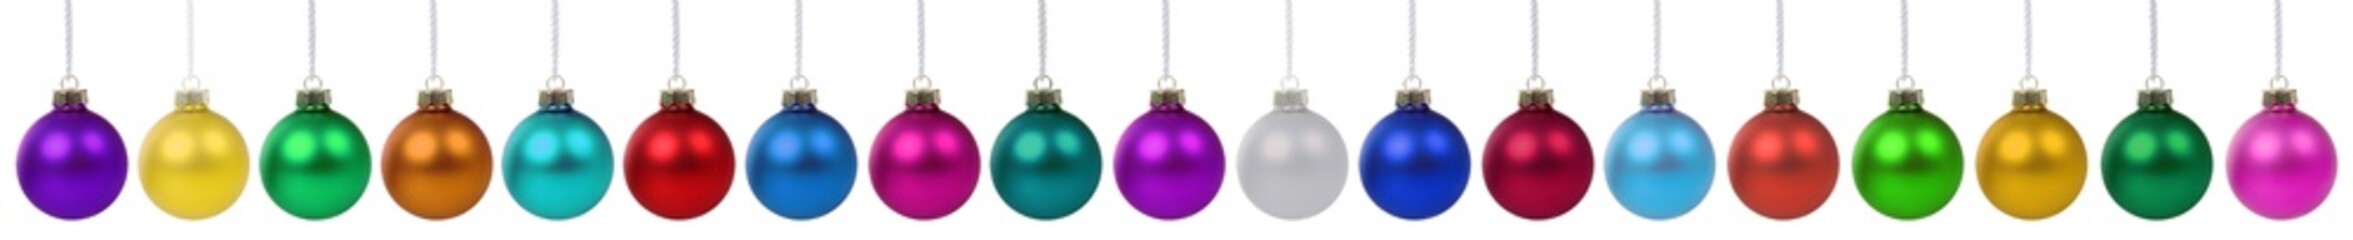 Collection of christmas balls colorful decoration banner in a row isolated on a white background